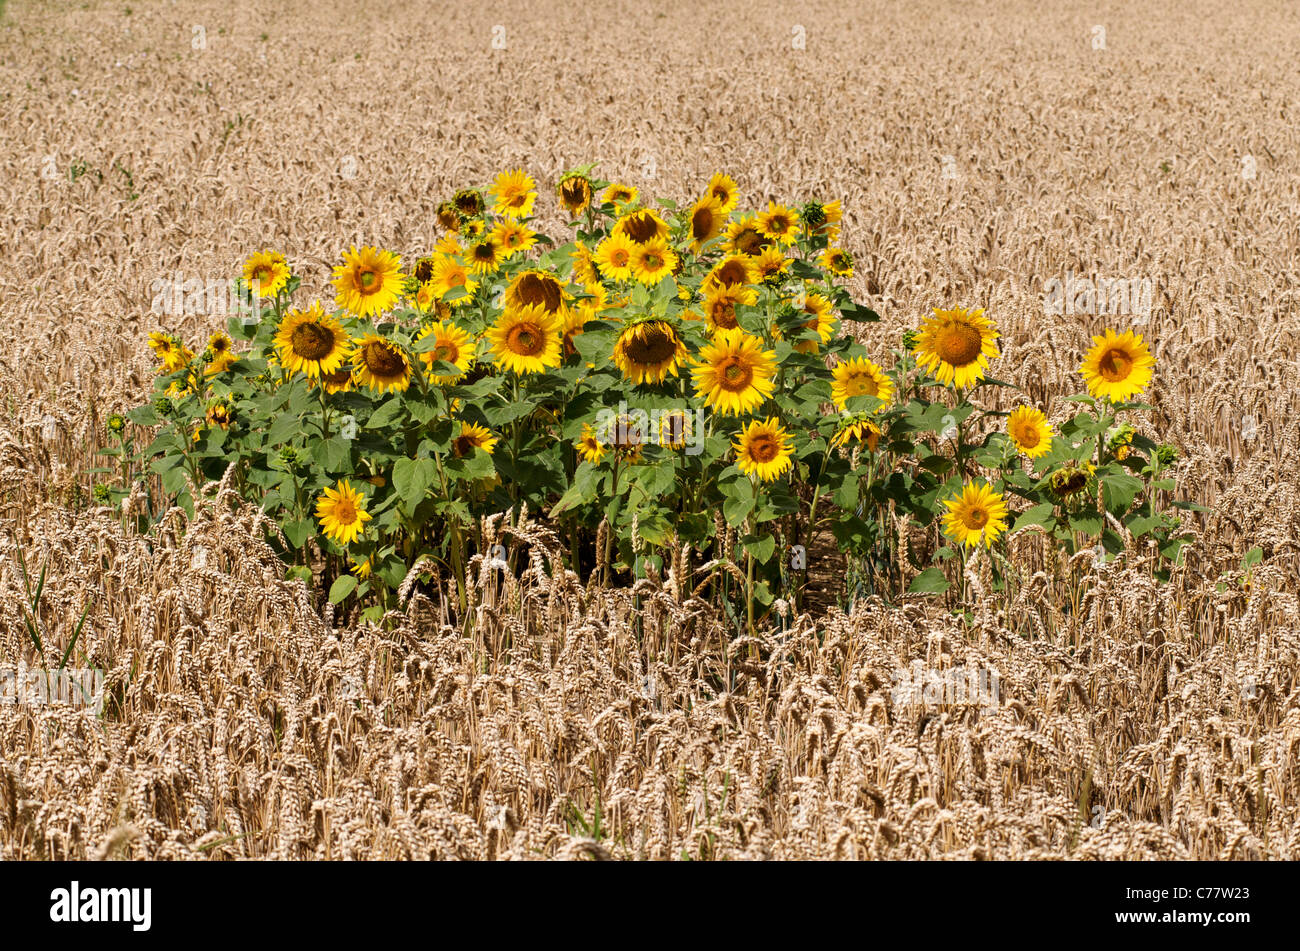 Intruder sunflowers in a field of wheat Stock Photo